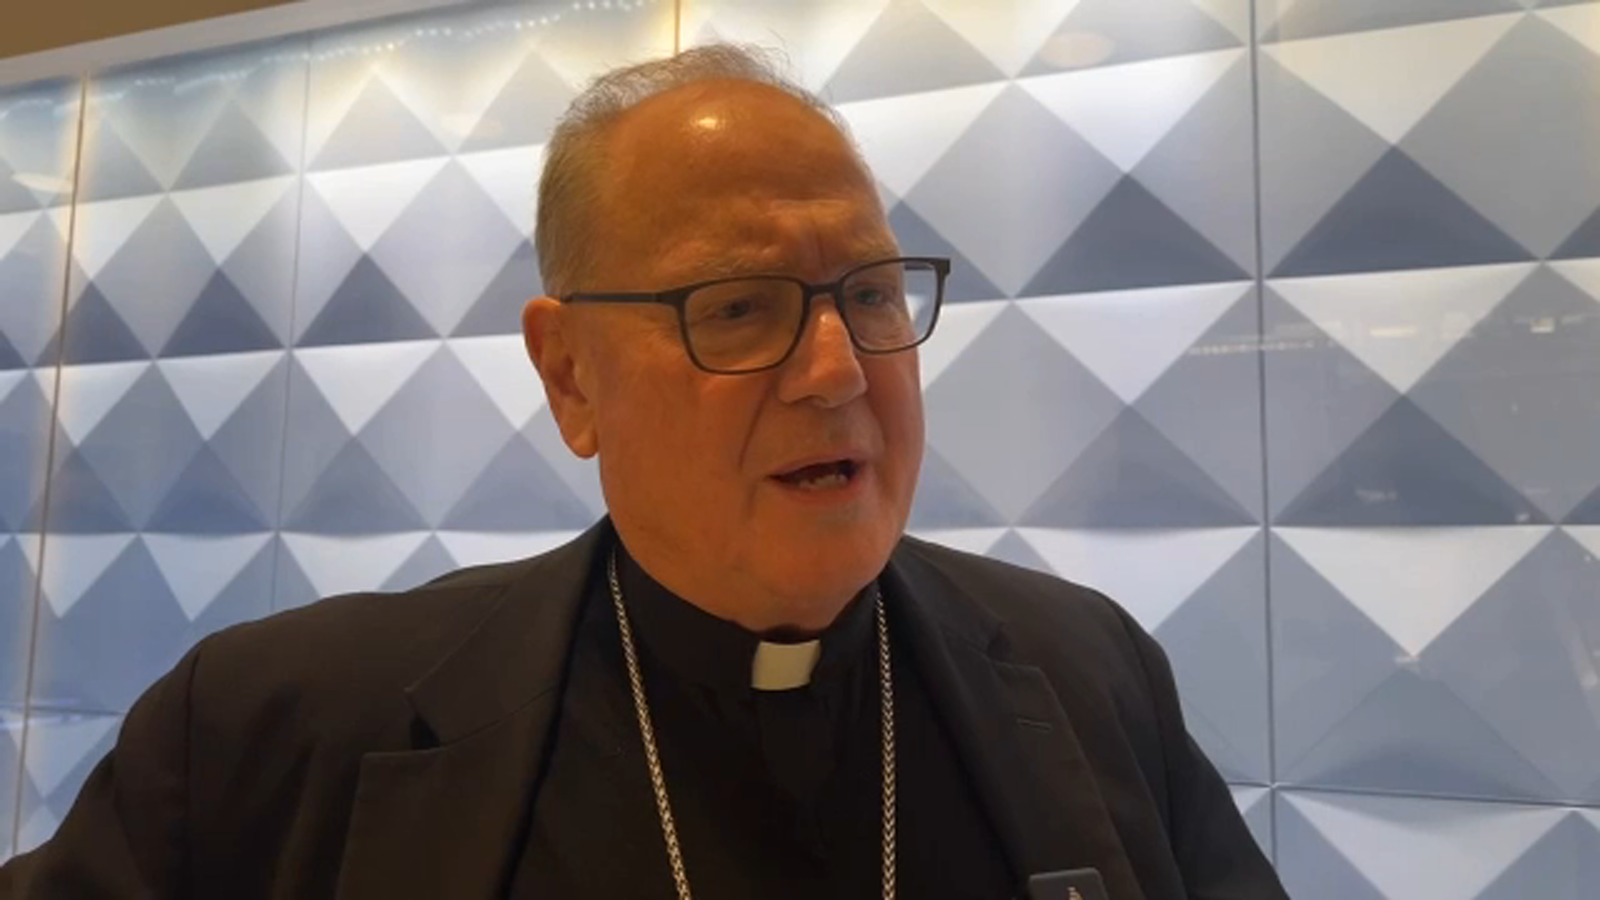 Cardinal Dolan traveling to Rome to attend funeral of Pope Emeritus Benedict XVI